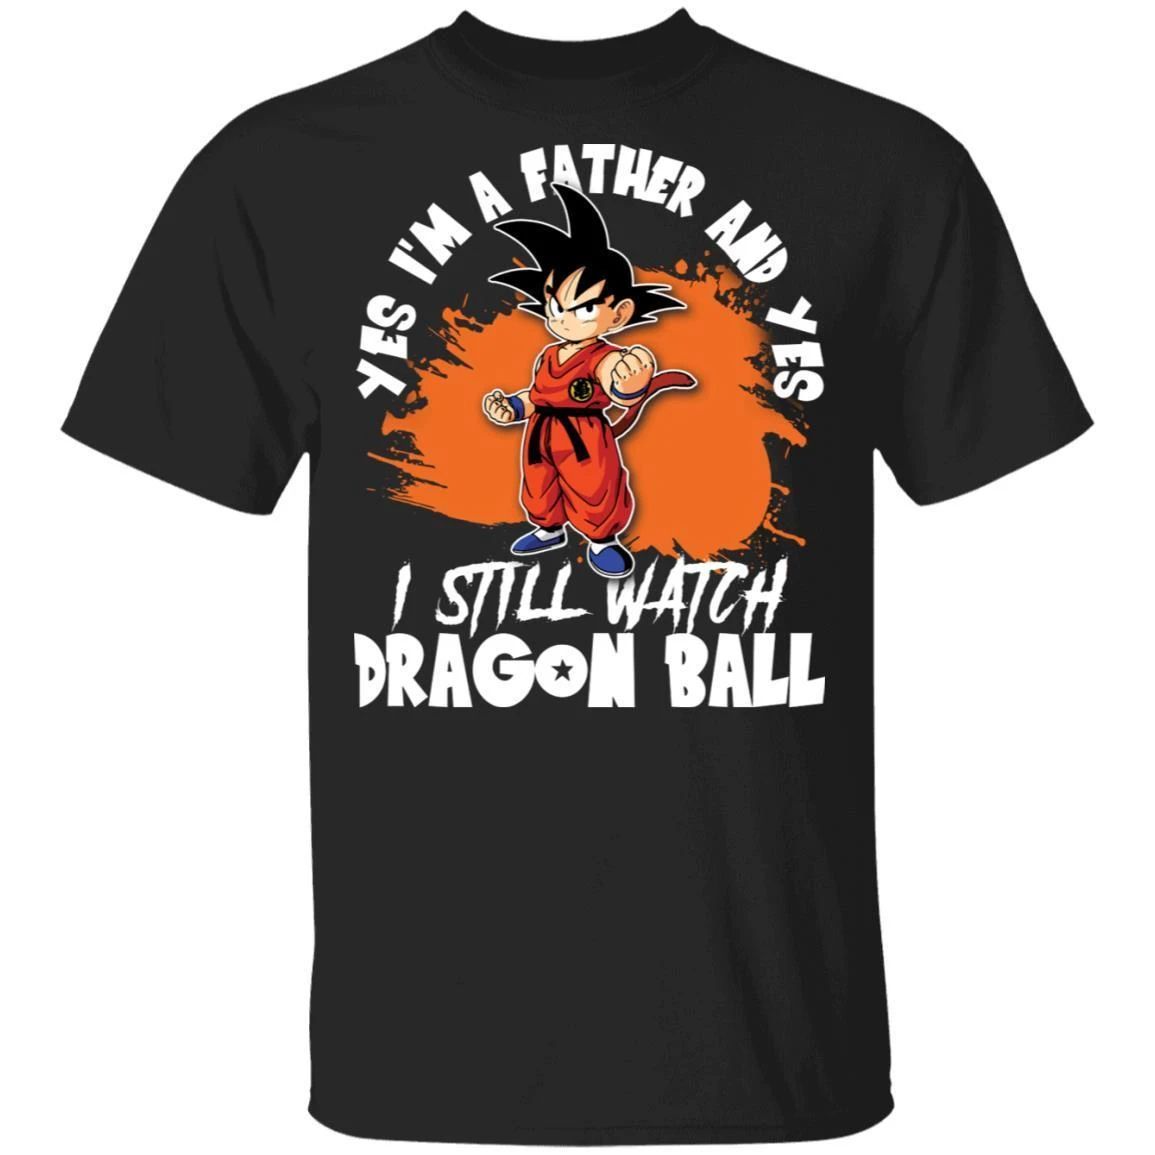 Yes I’m A Father And Yes I Still Watch Dragon Ball Shirt Son Goku Tee